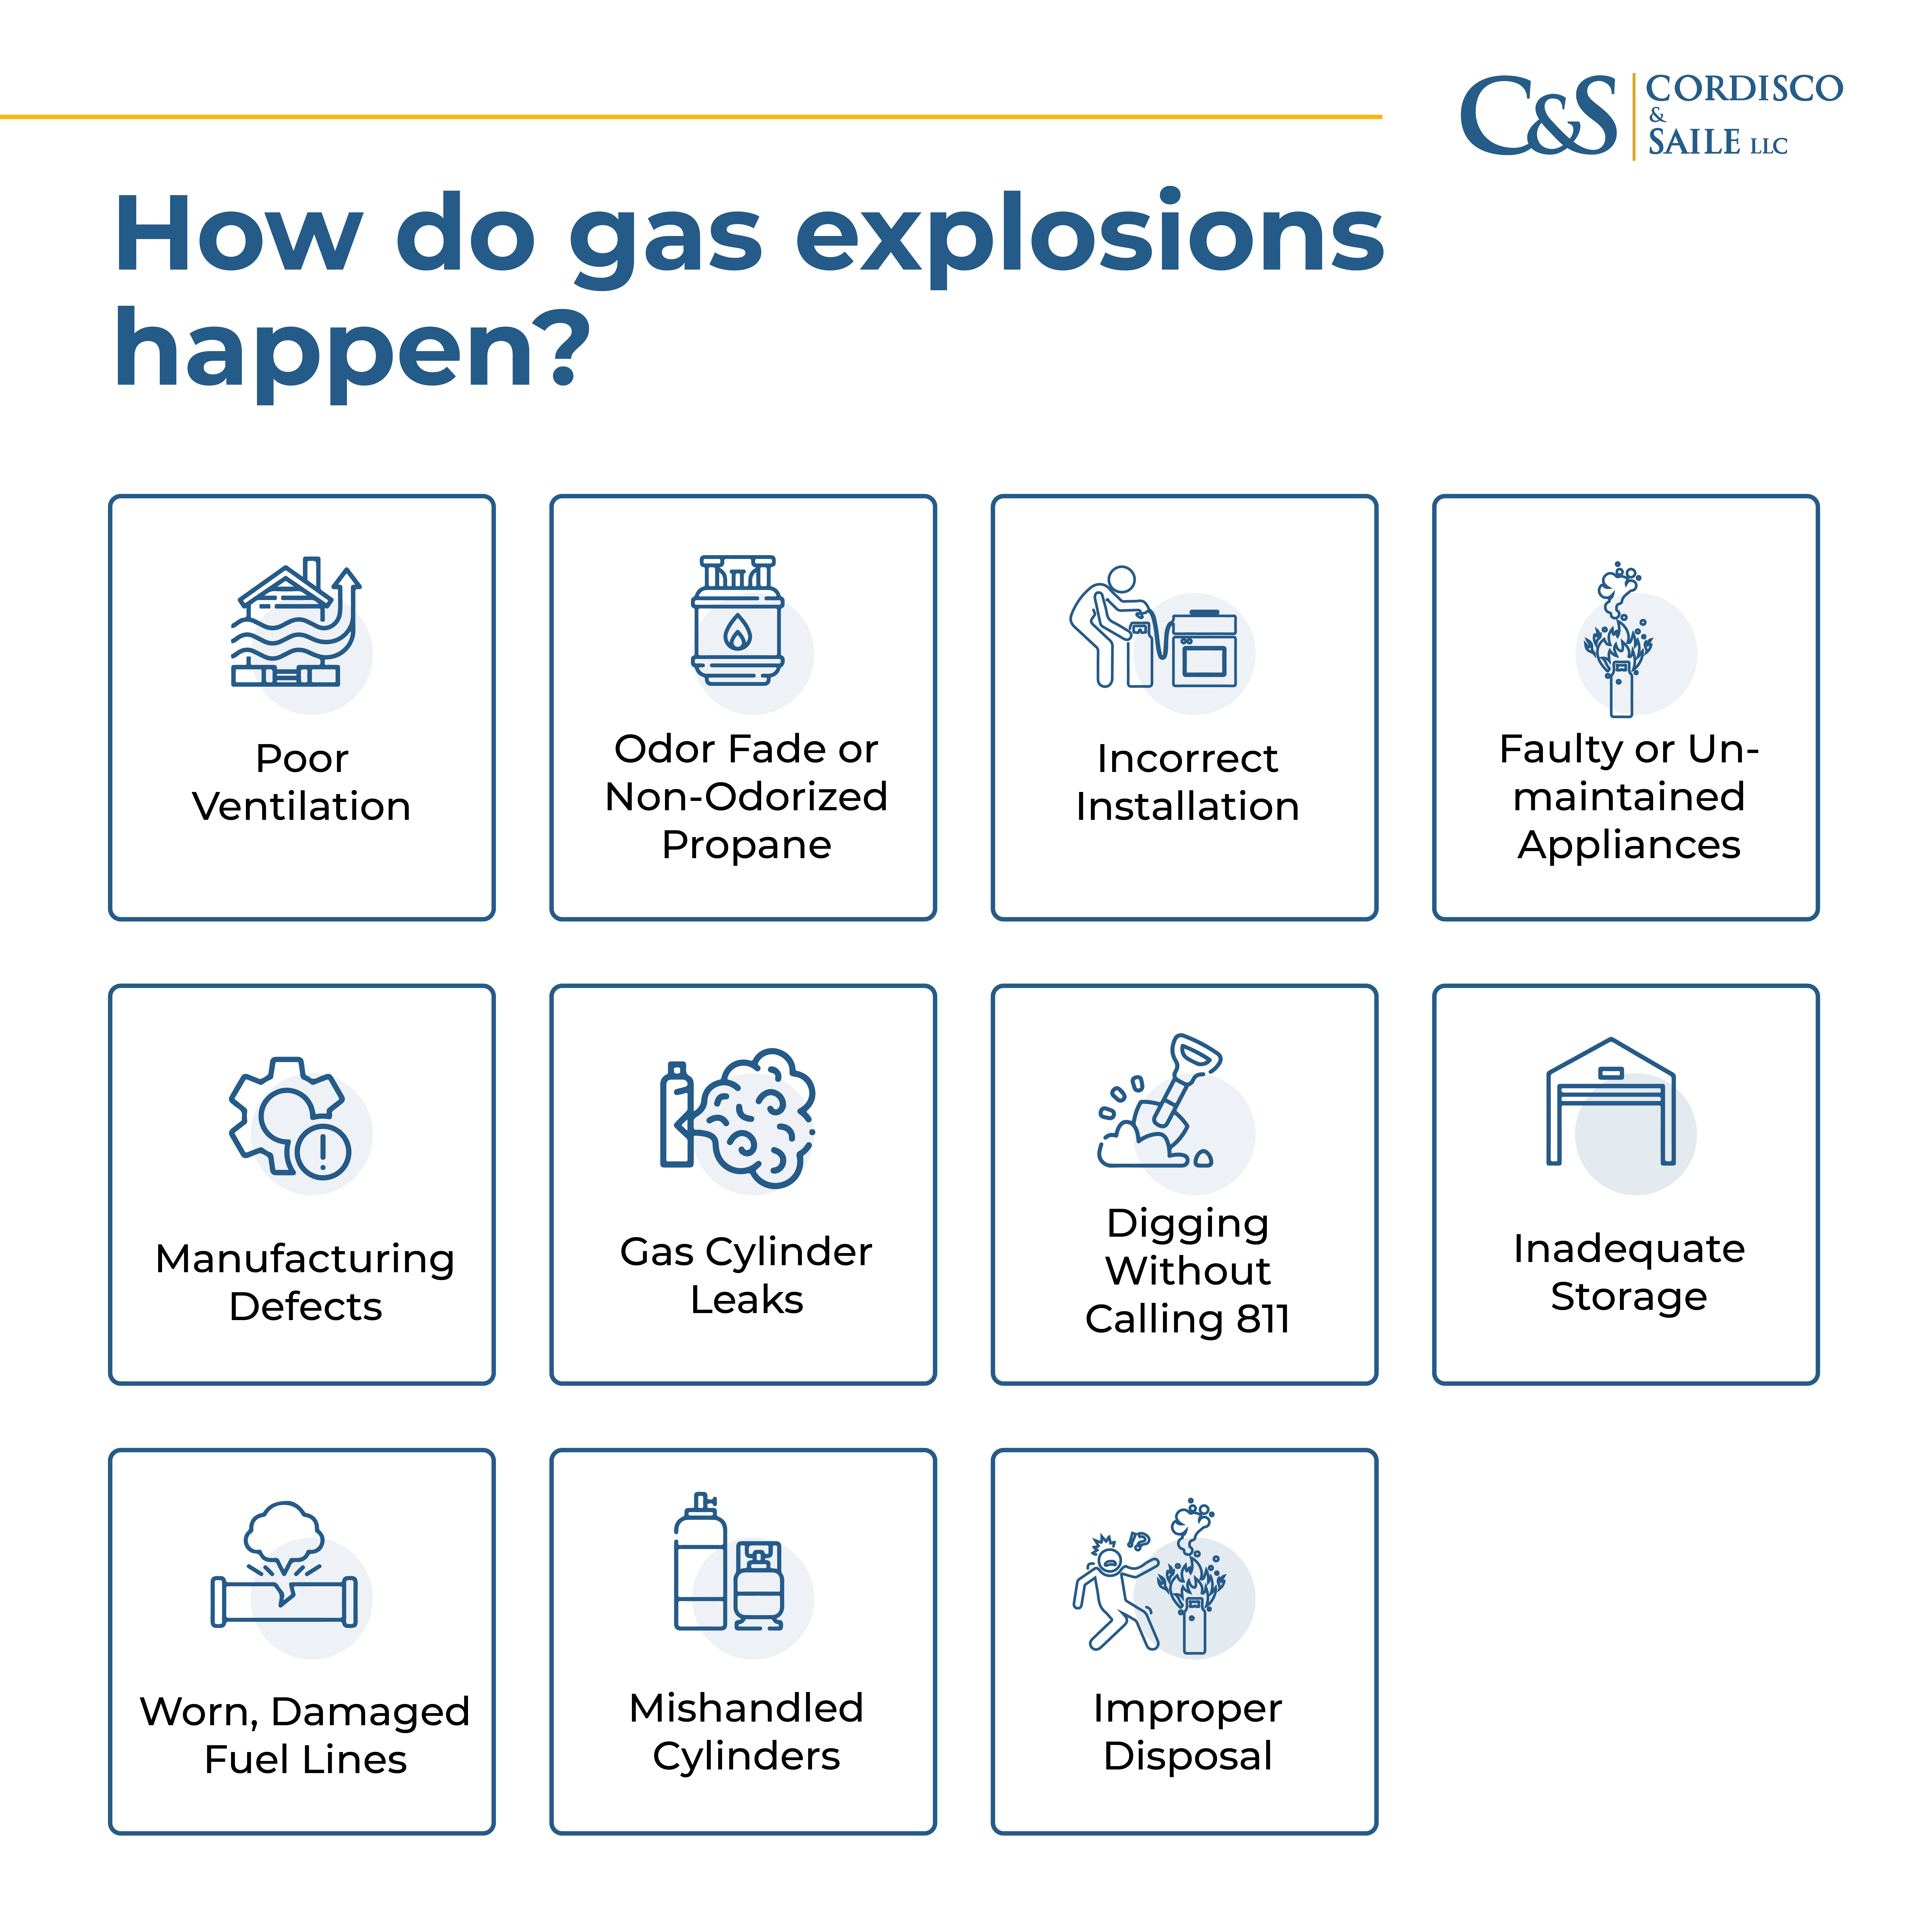 how do gas explosions happen graphic